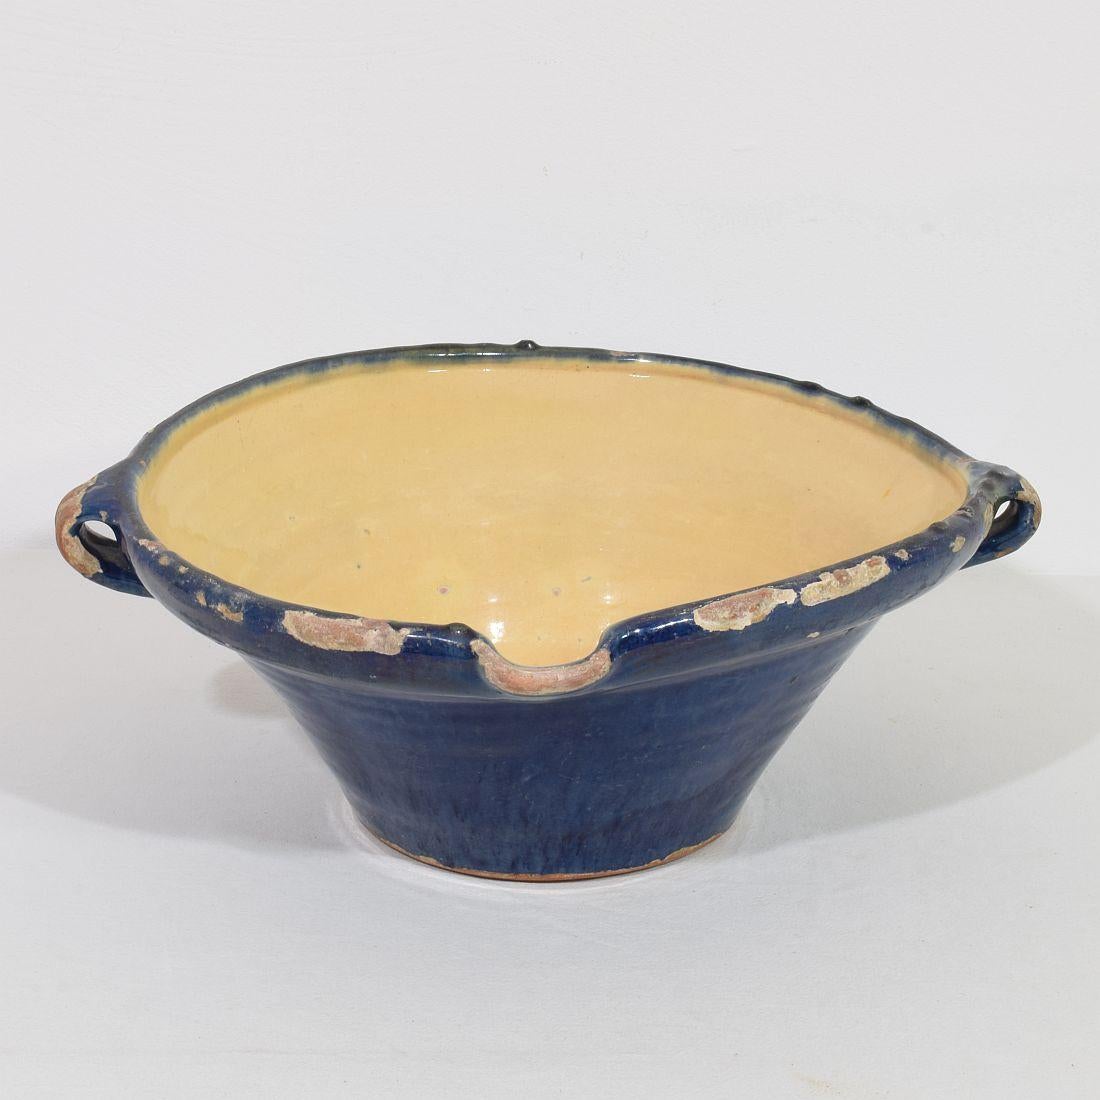 Great authentic and extremely rare piece of pottery from the Provence. Beautiful weathered and an amazing and almost impossible to find blue color
France, circa 1850
Good but weathered condition.
